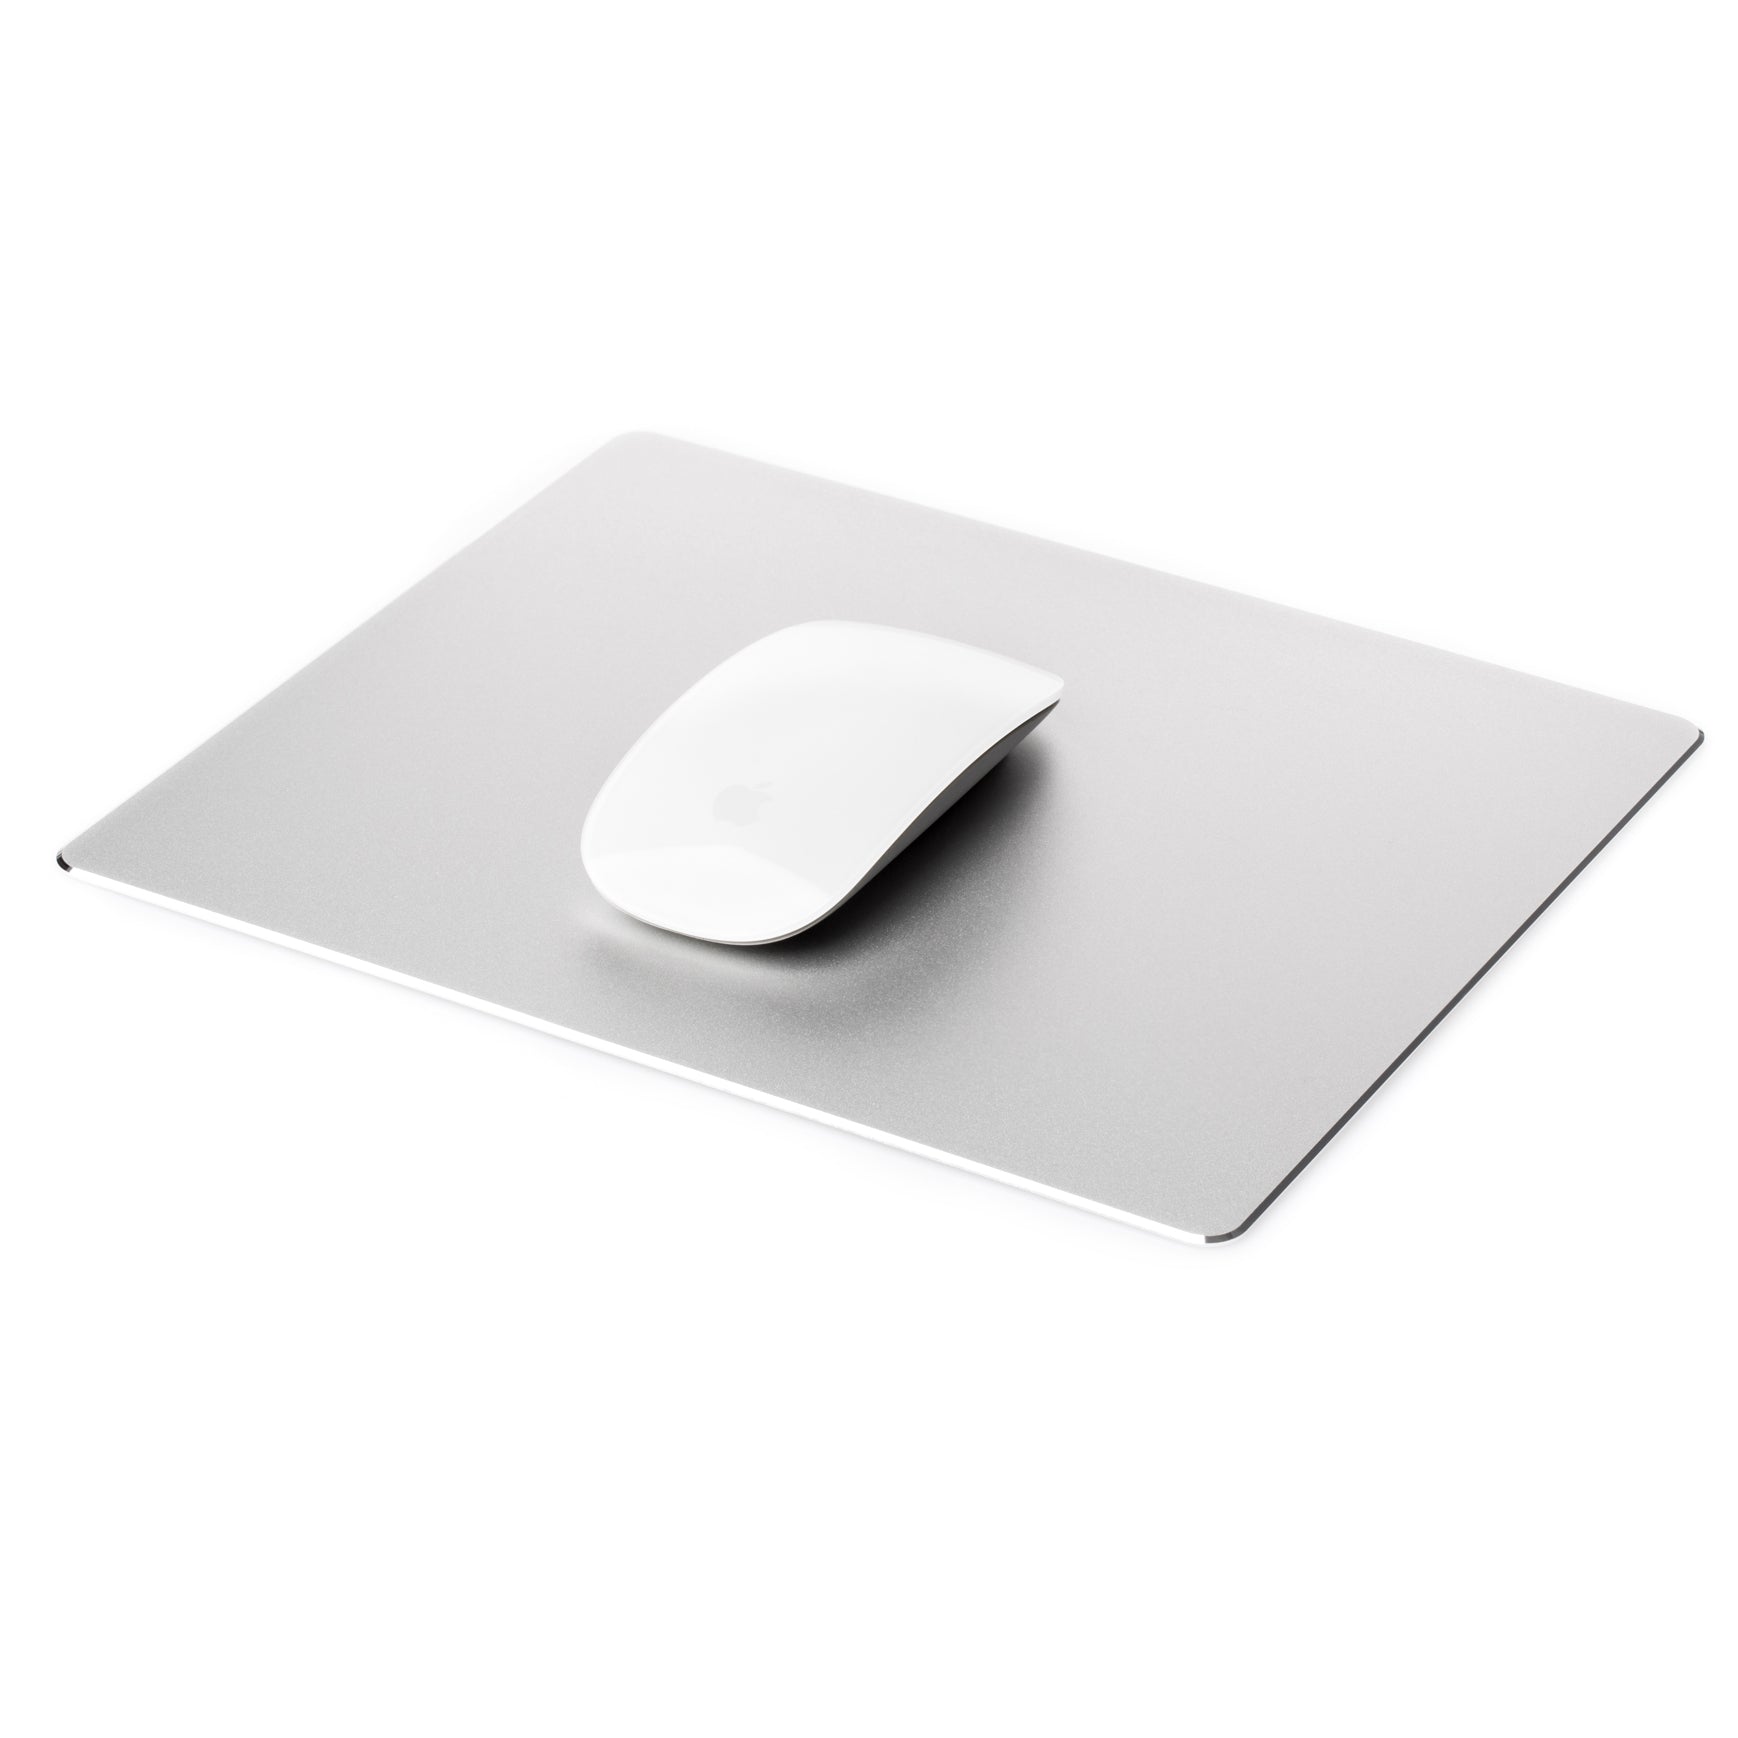 Apple mouse on a rectangular aluminum Mouse pad suitable for gaming, home, work or office.